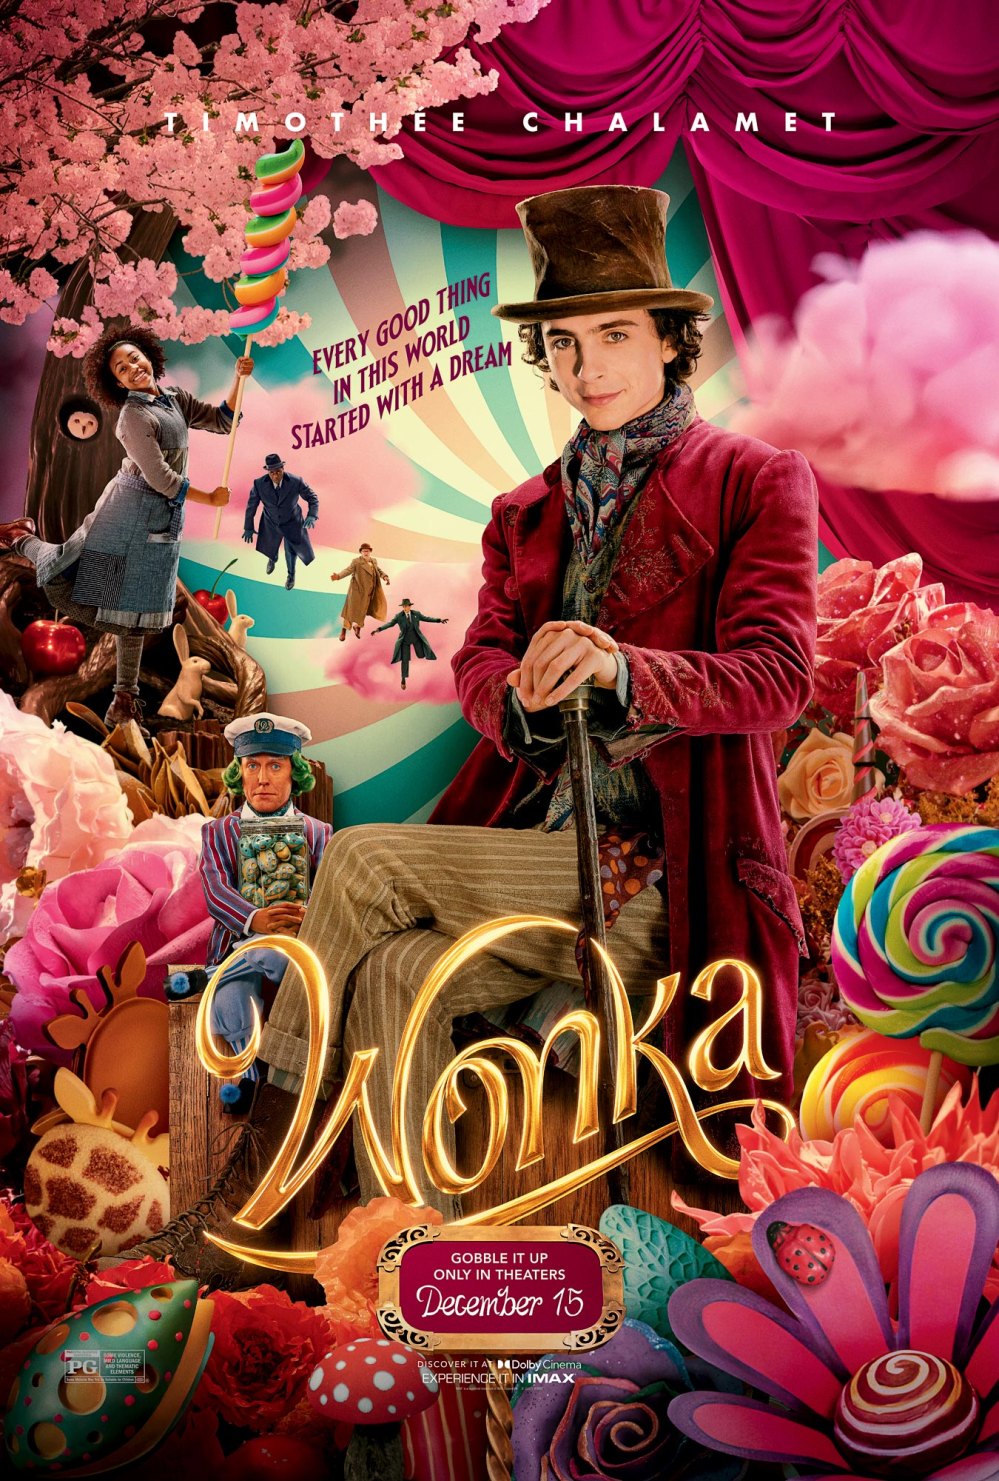 Timothee Chalamets beste Looks auf Willy Wonka Tour 573